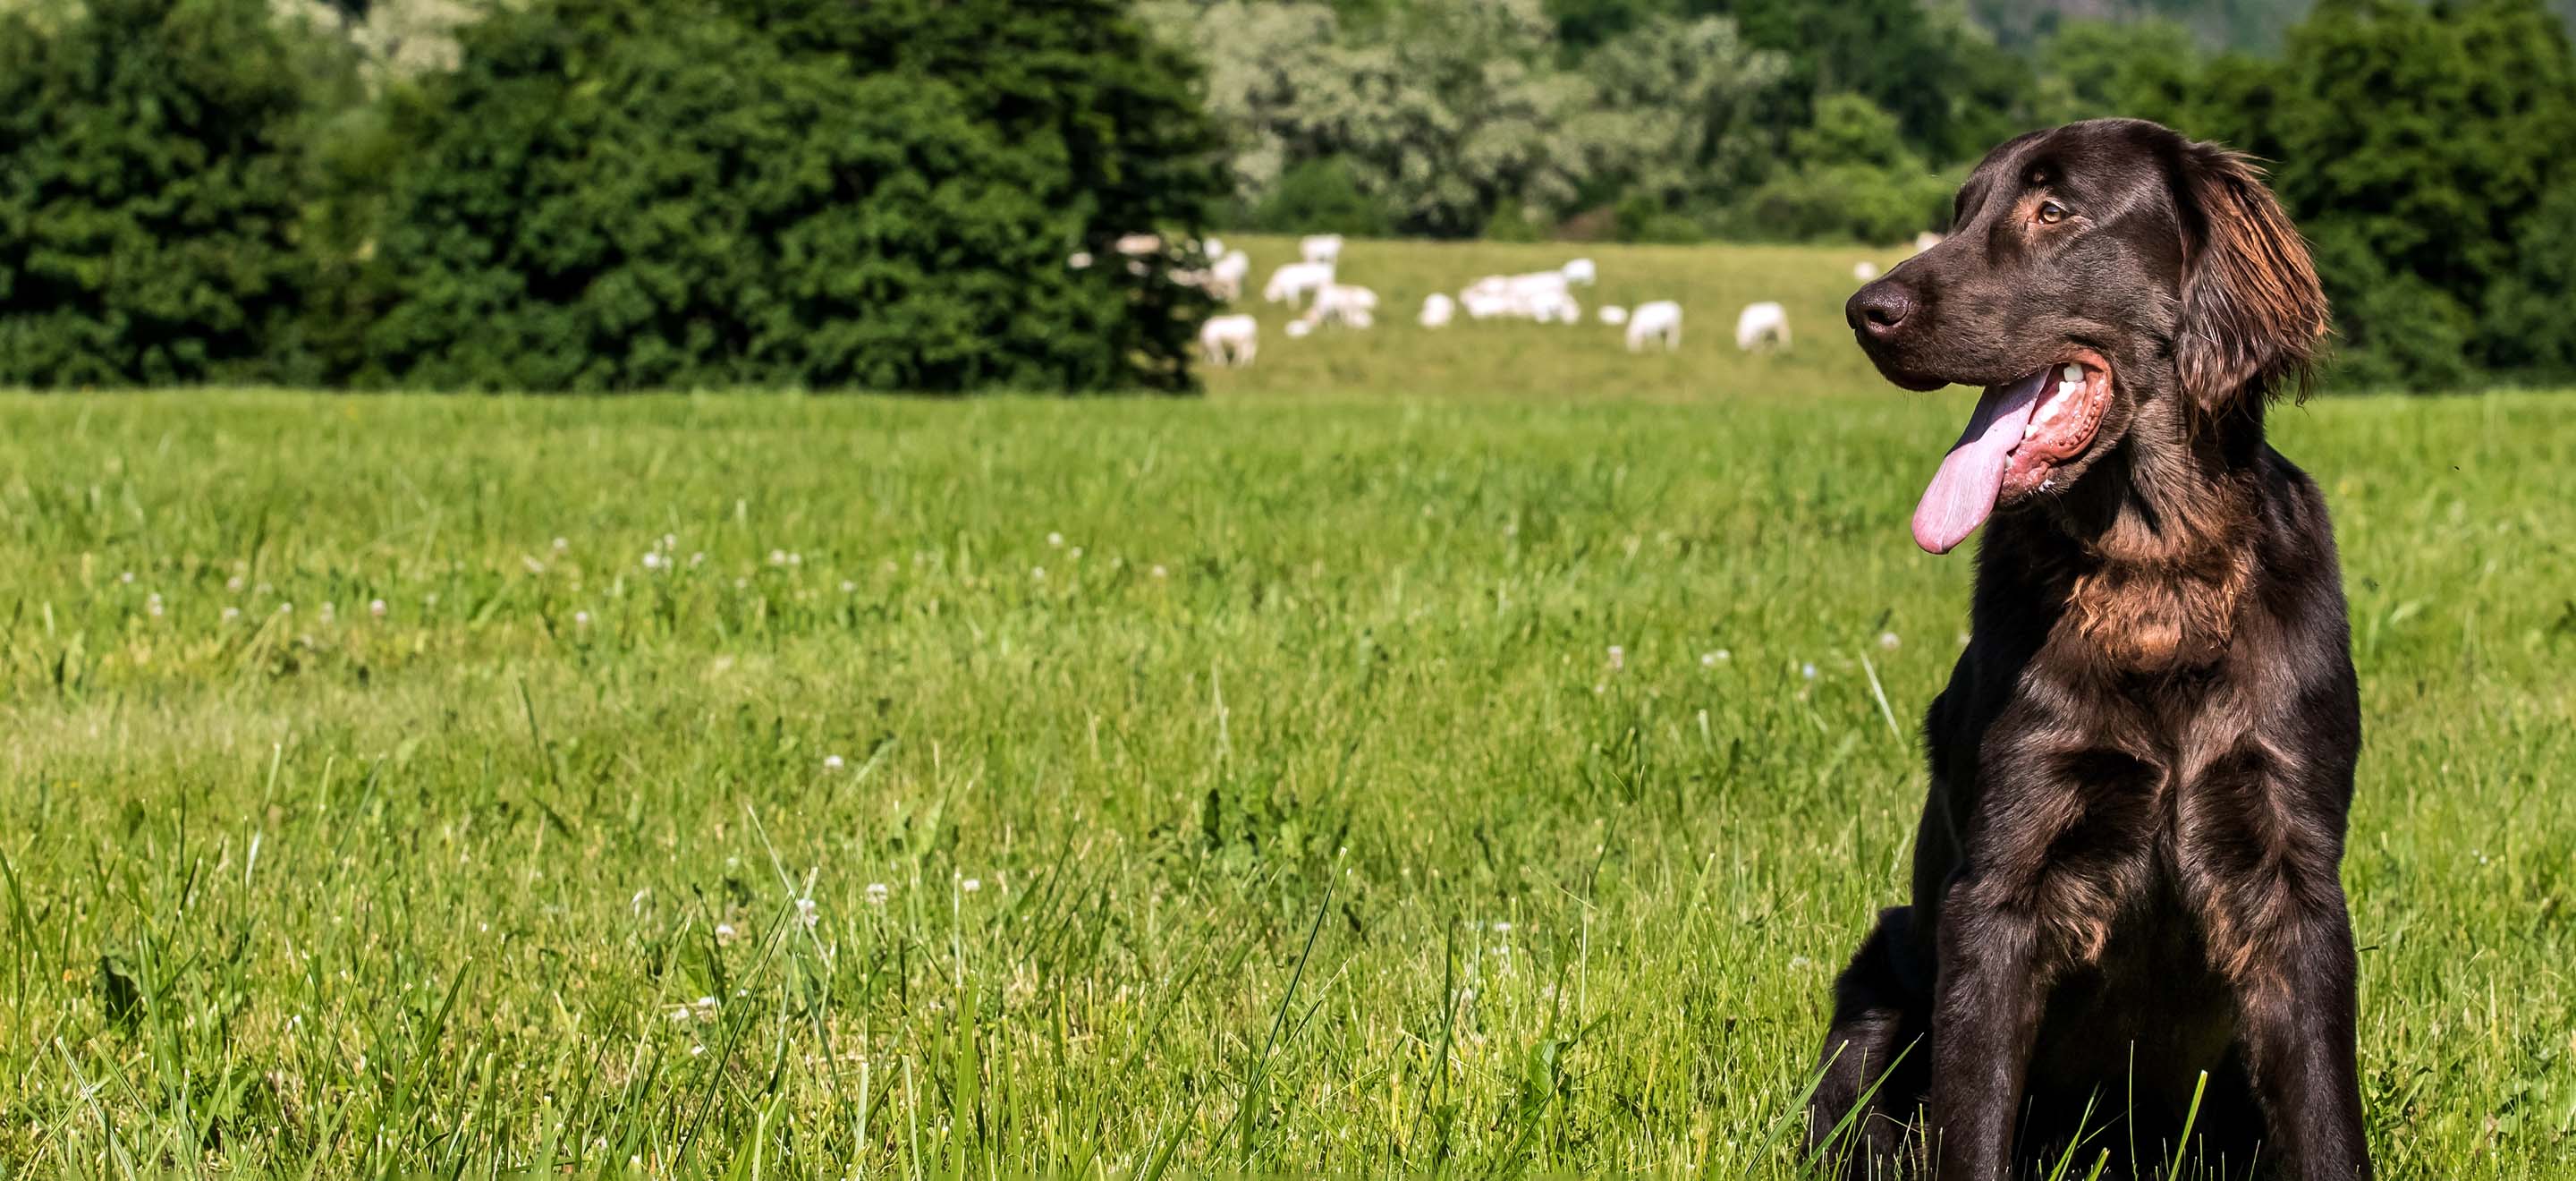 A Flat Coated Retriever dog standing in a livestock field with trees and sheep in the background image